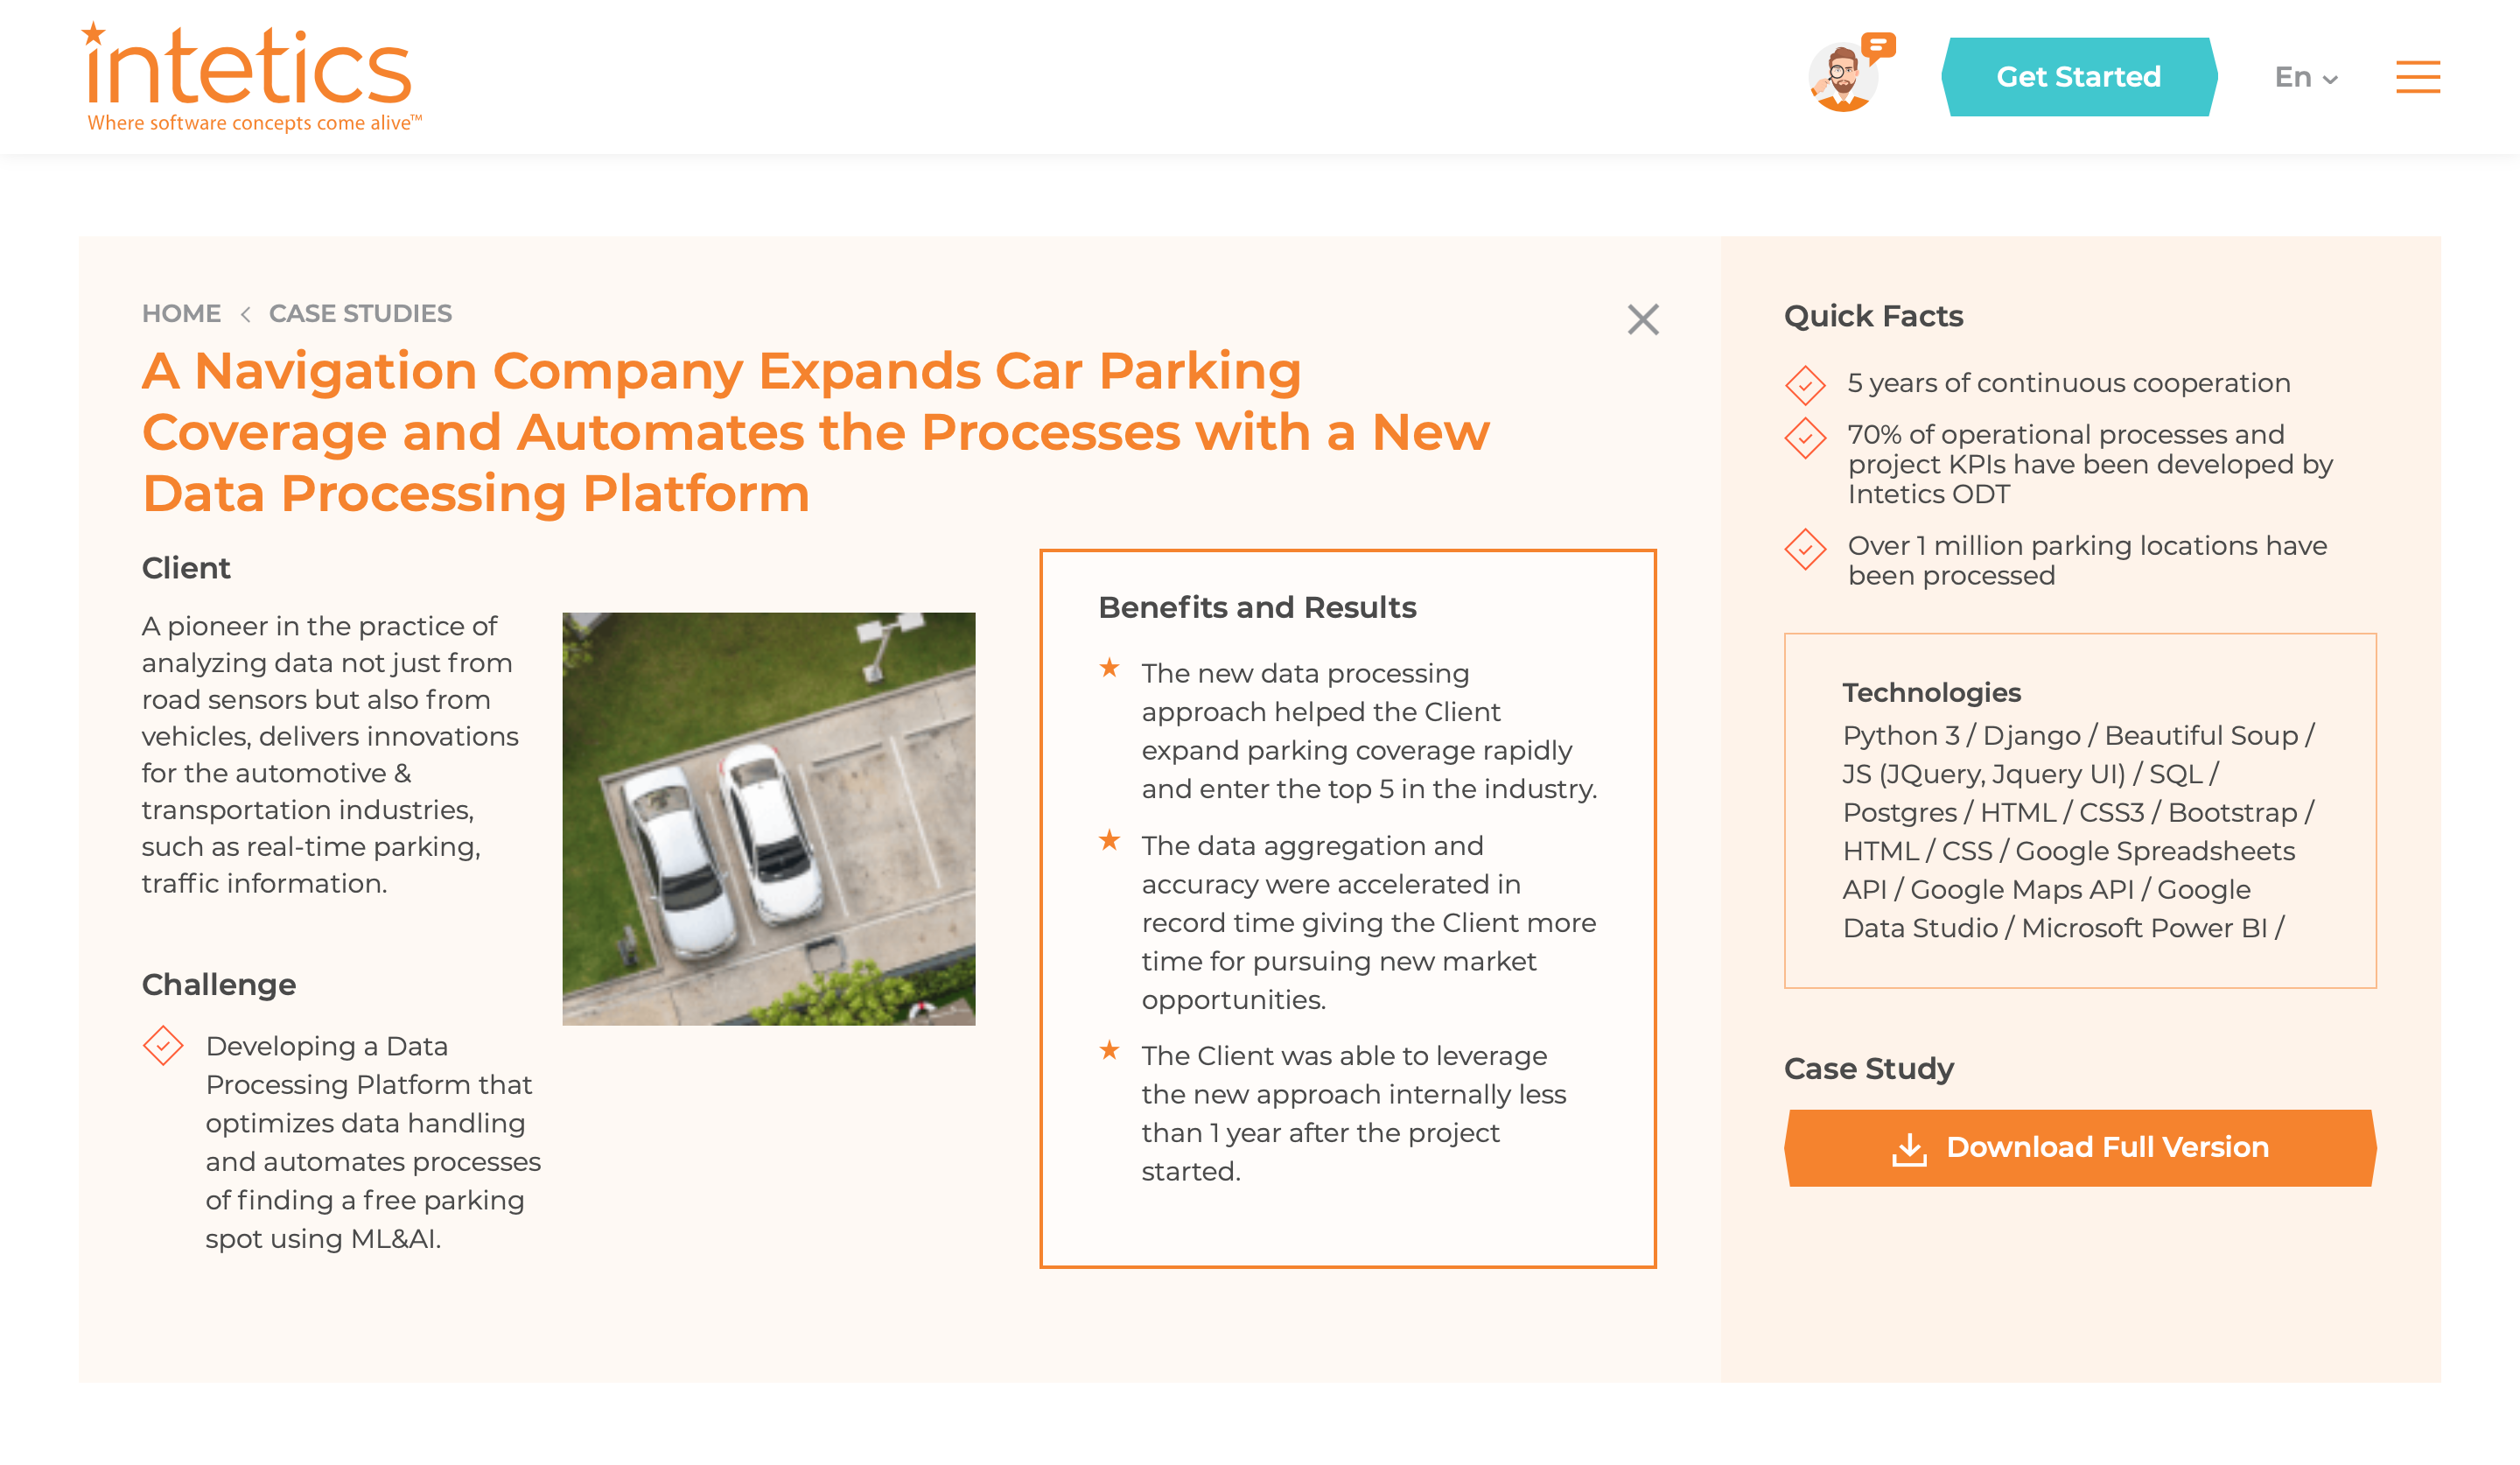 A Navigation Company Expands Car Parking Coverage and Automates the Processes with a New Data Processing Platform